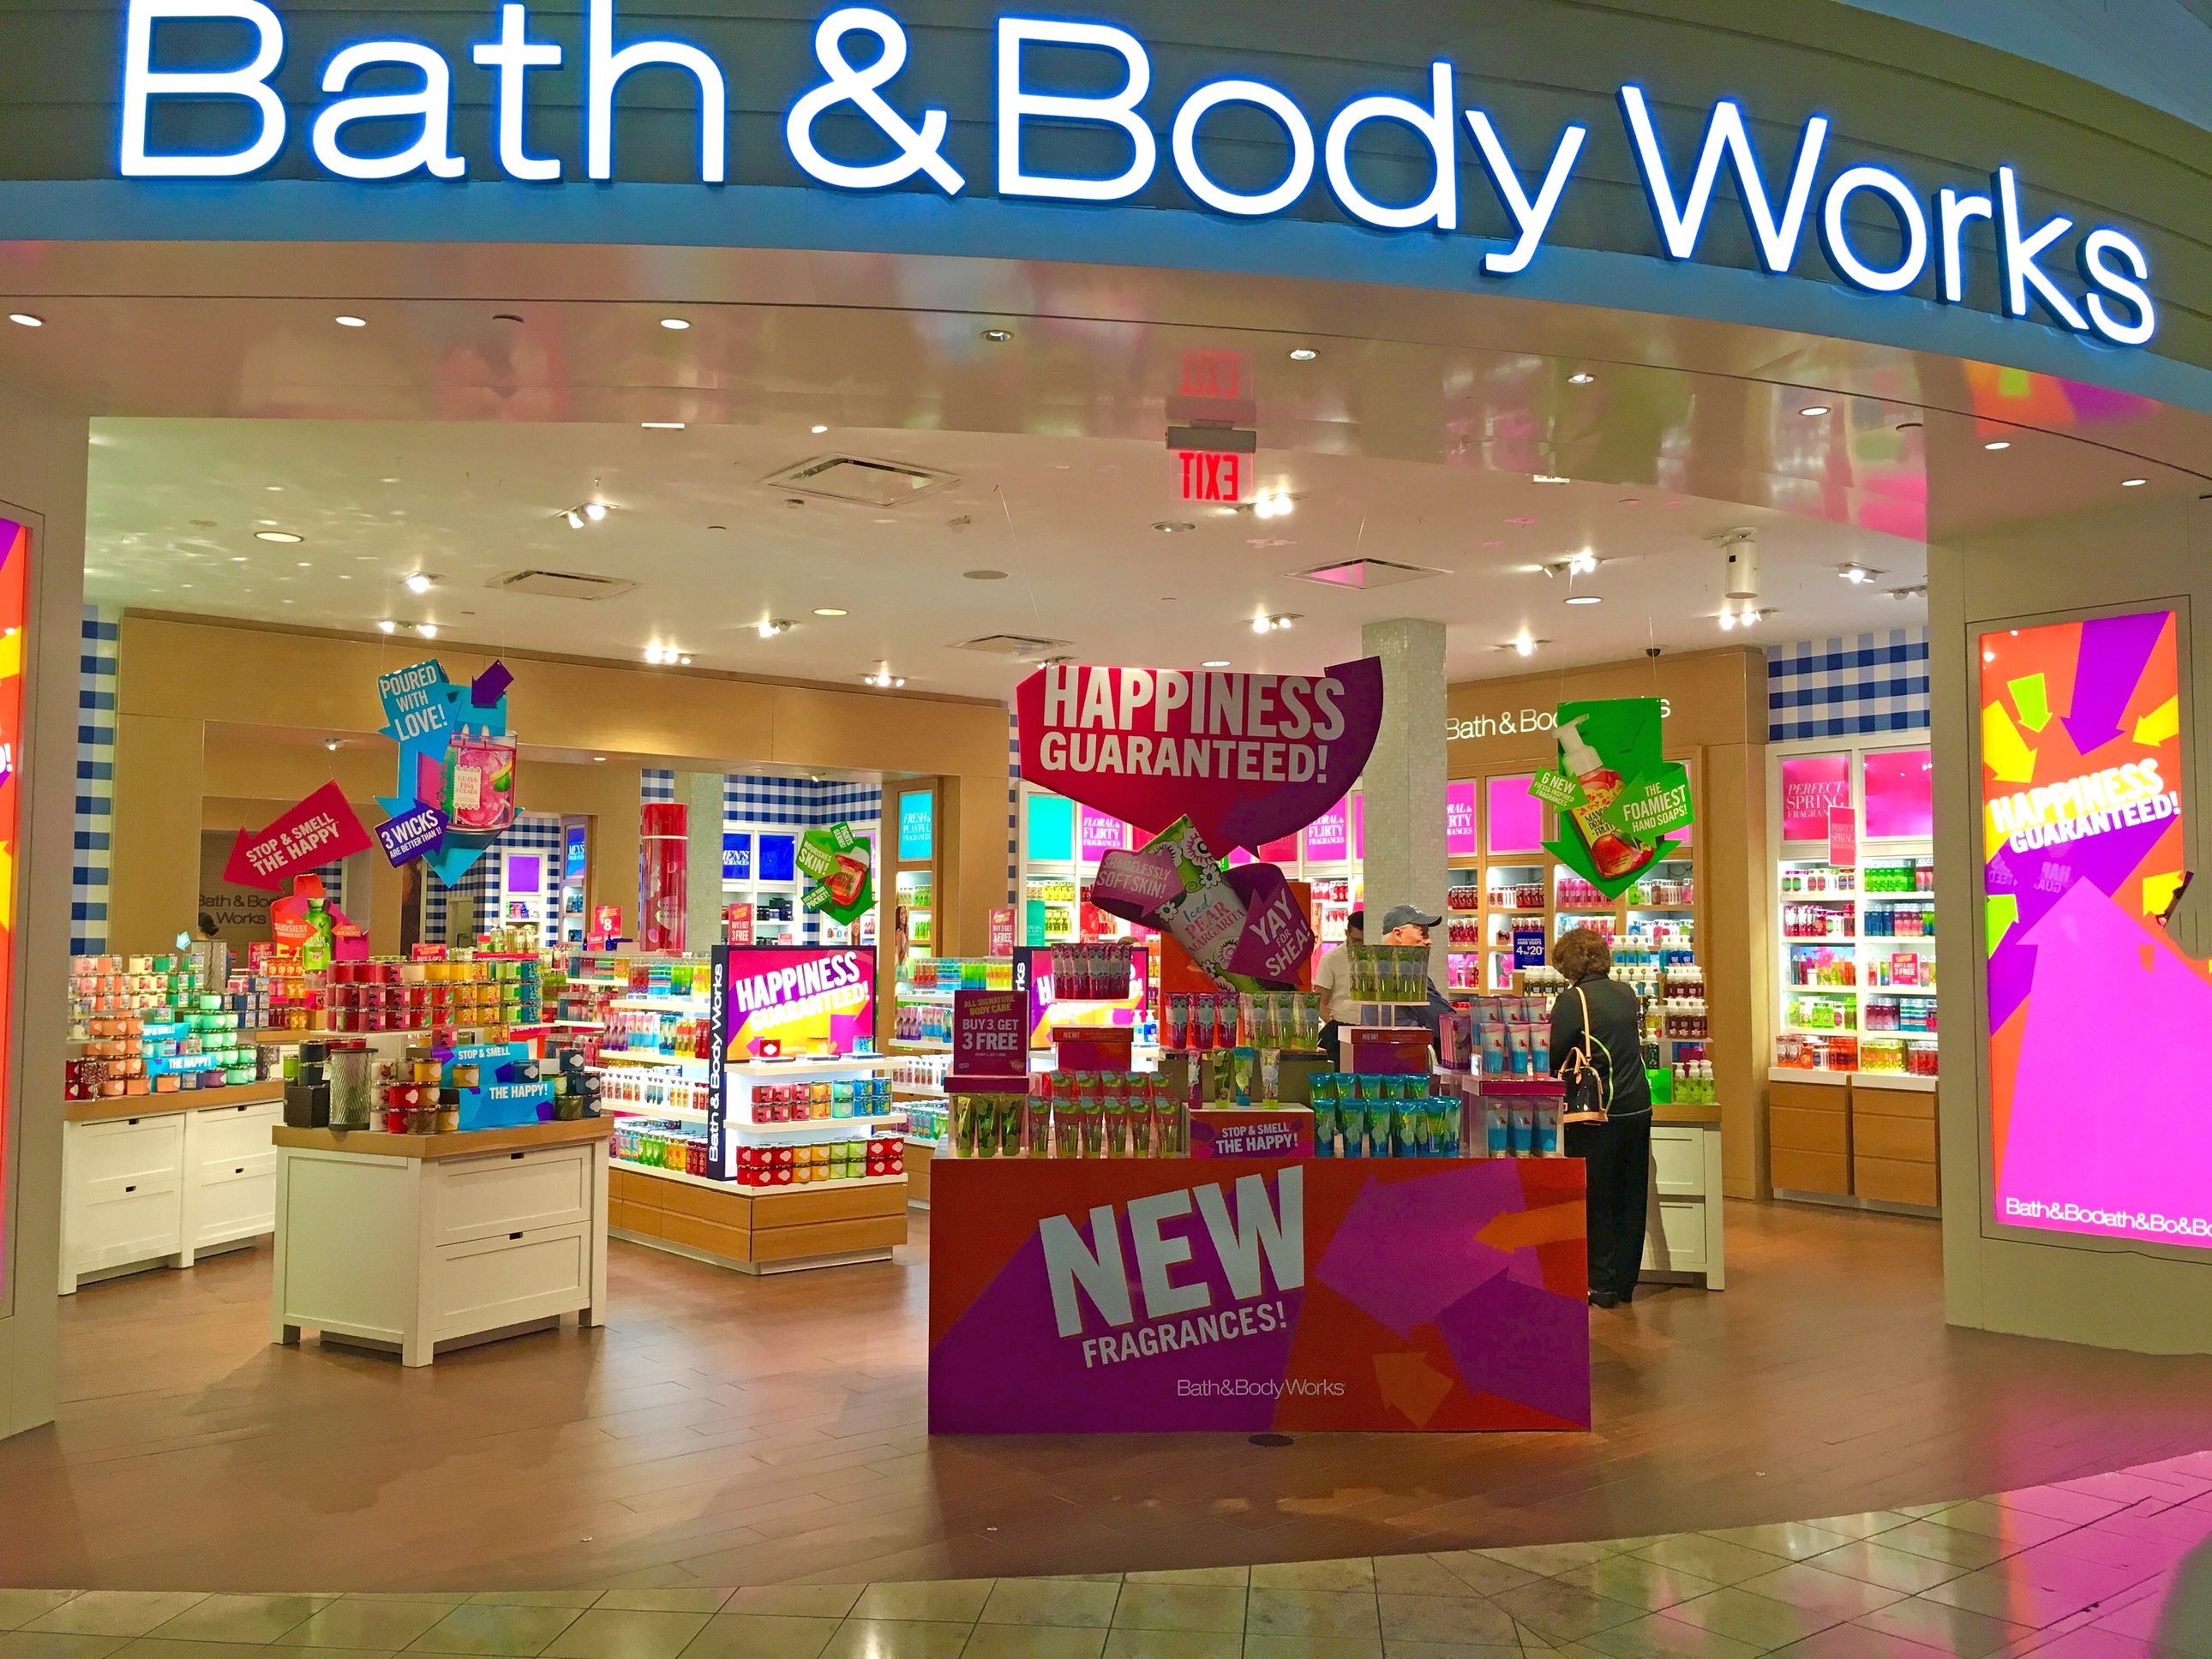 Bath and Body Works coupons: Save big on candles and soaps